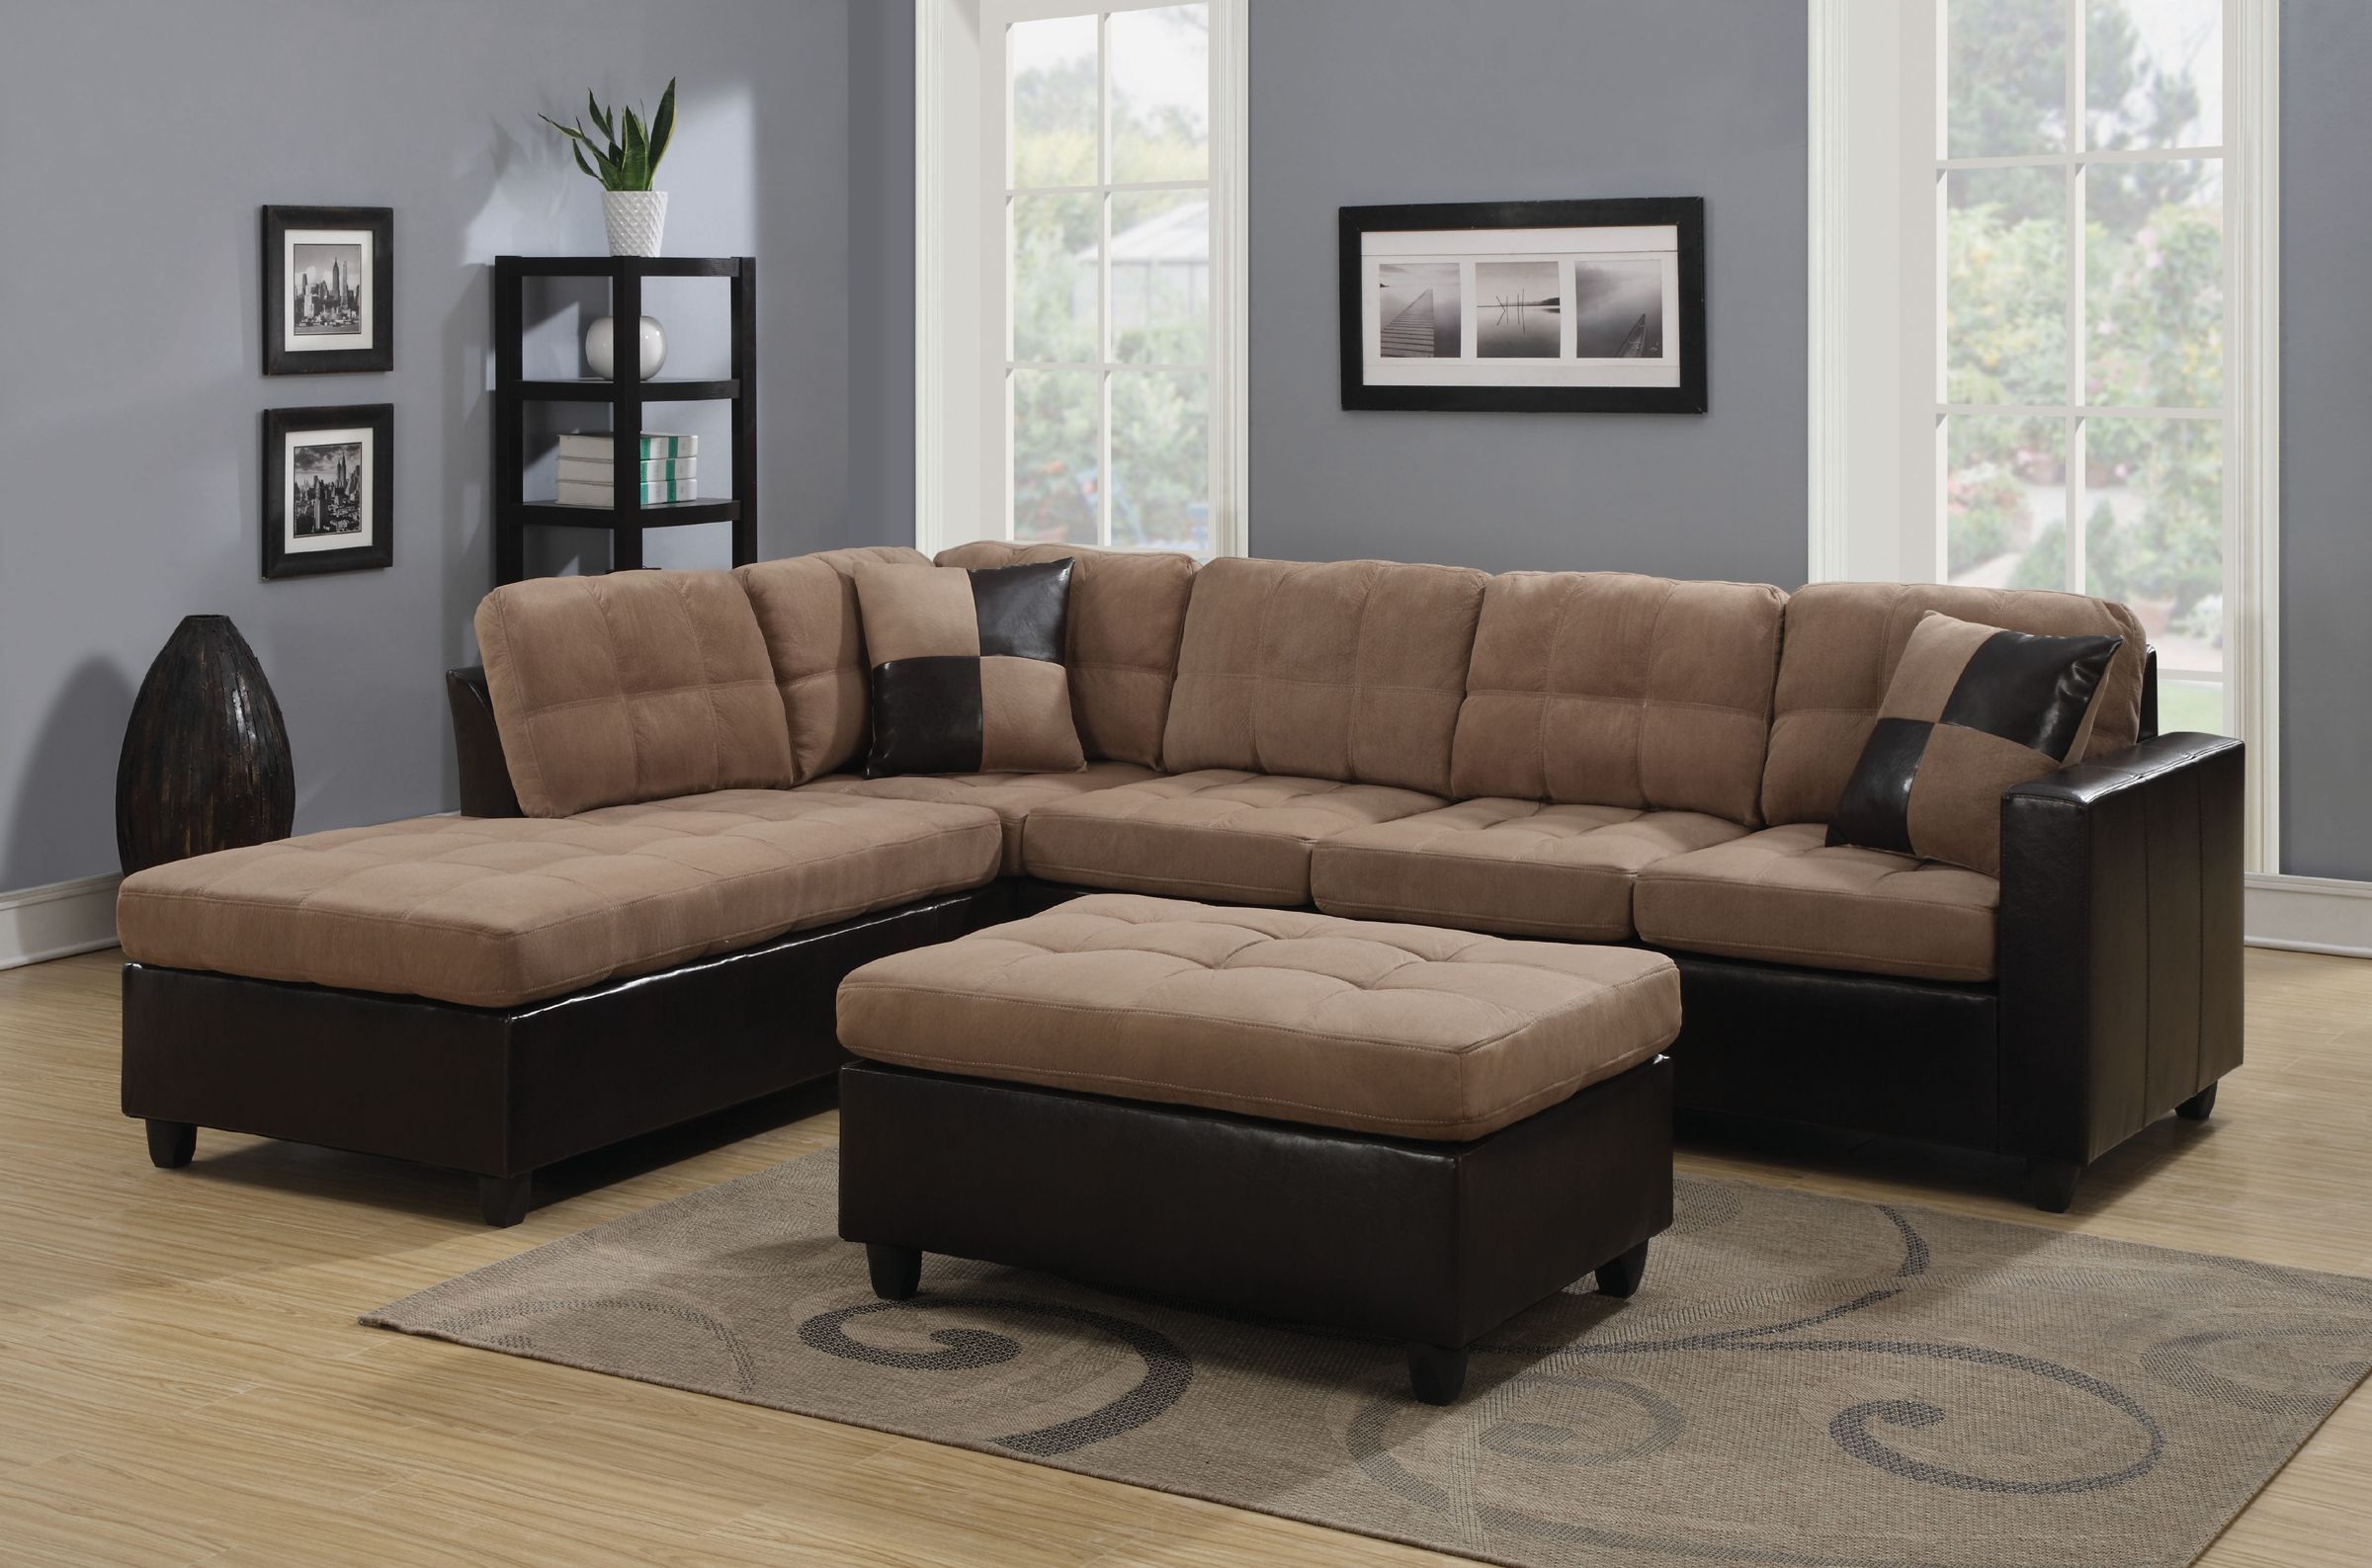 Reversible Tan Microfiber Sectional Sofa With Chaise Set With Regard To Clifton Reversible Sectional Sofas With Pillows (View 5 of 15)